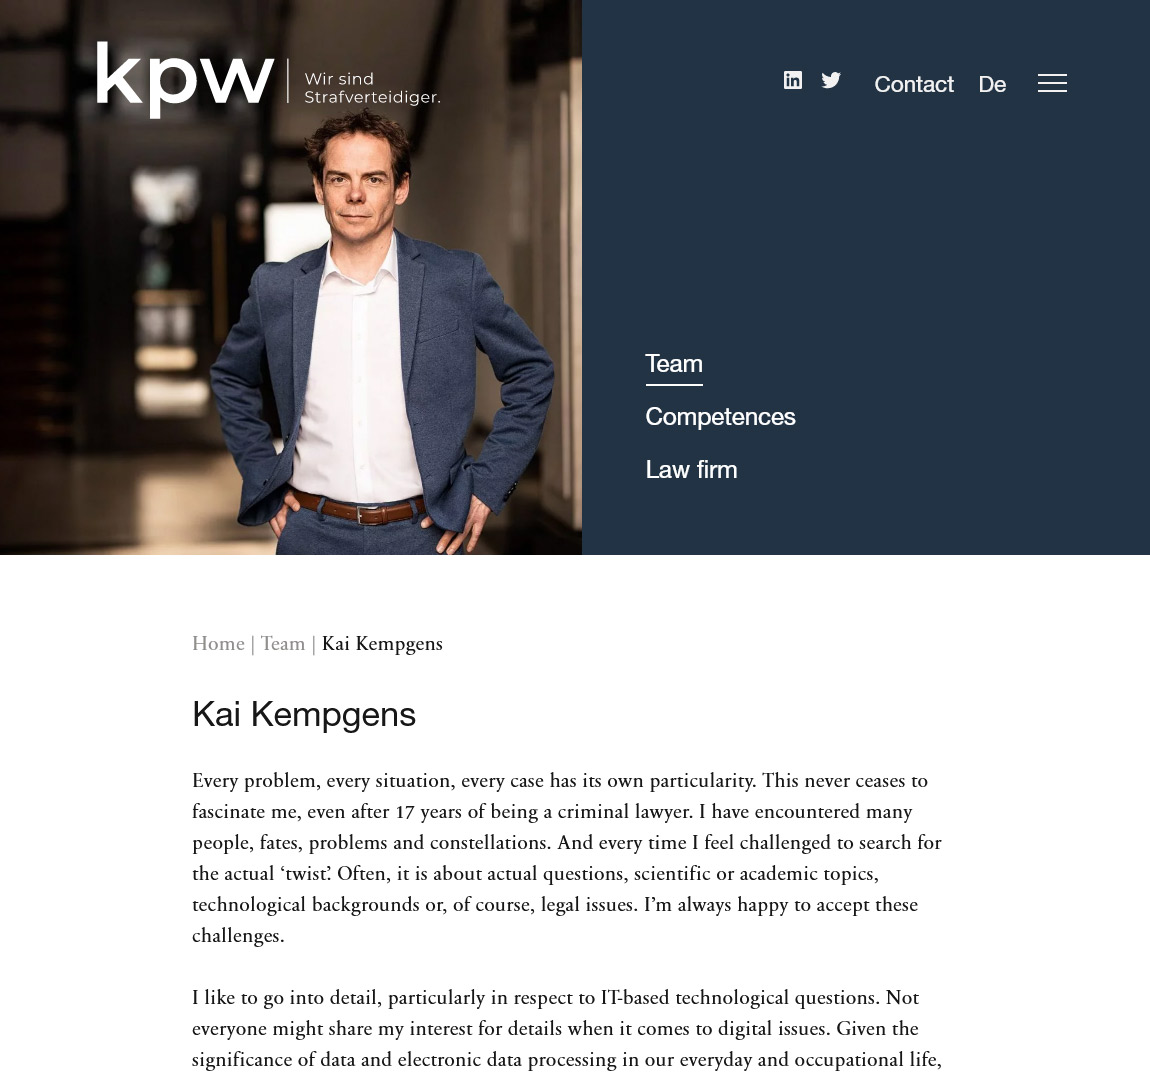 Webdesign lawyer law firm from Berlin